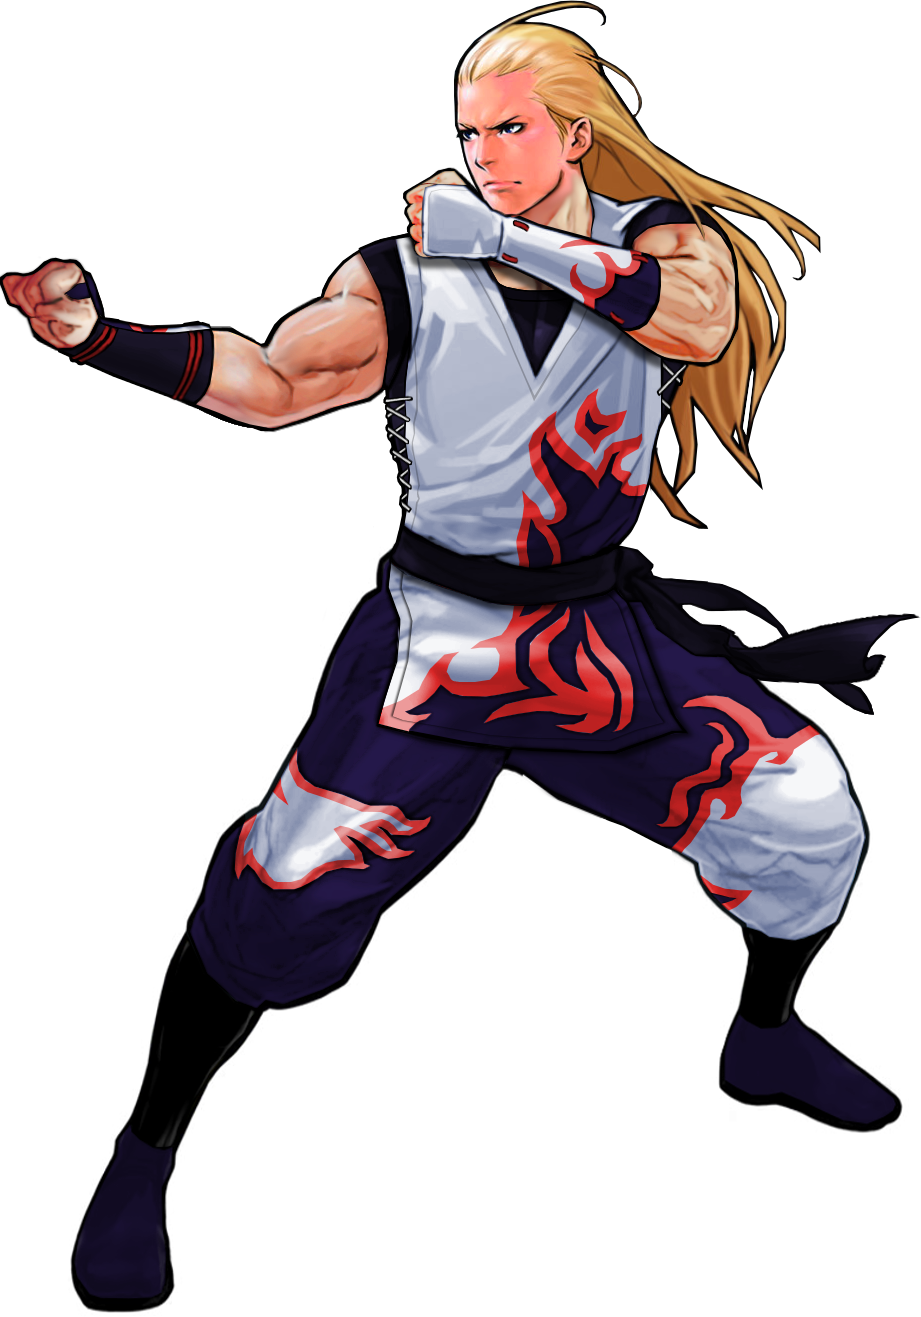 Andy 2002 Xiv By Topdog4815 - Andy Kof Png (921x1317)